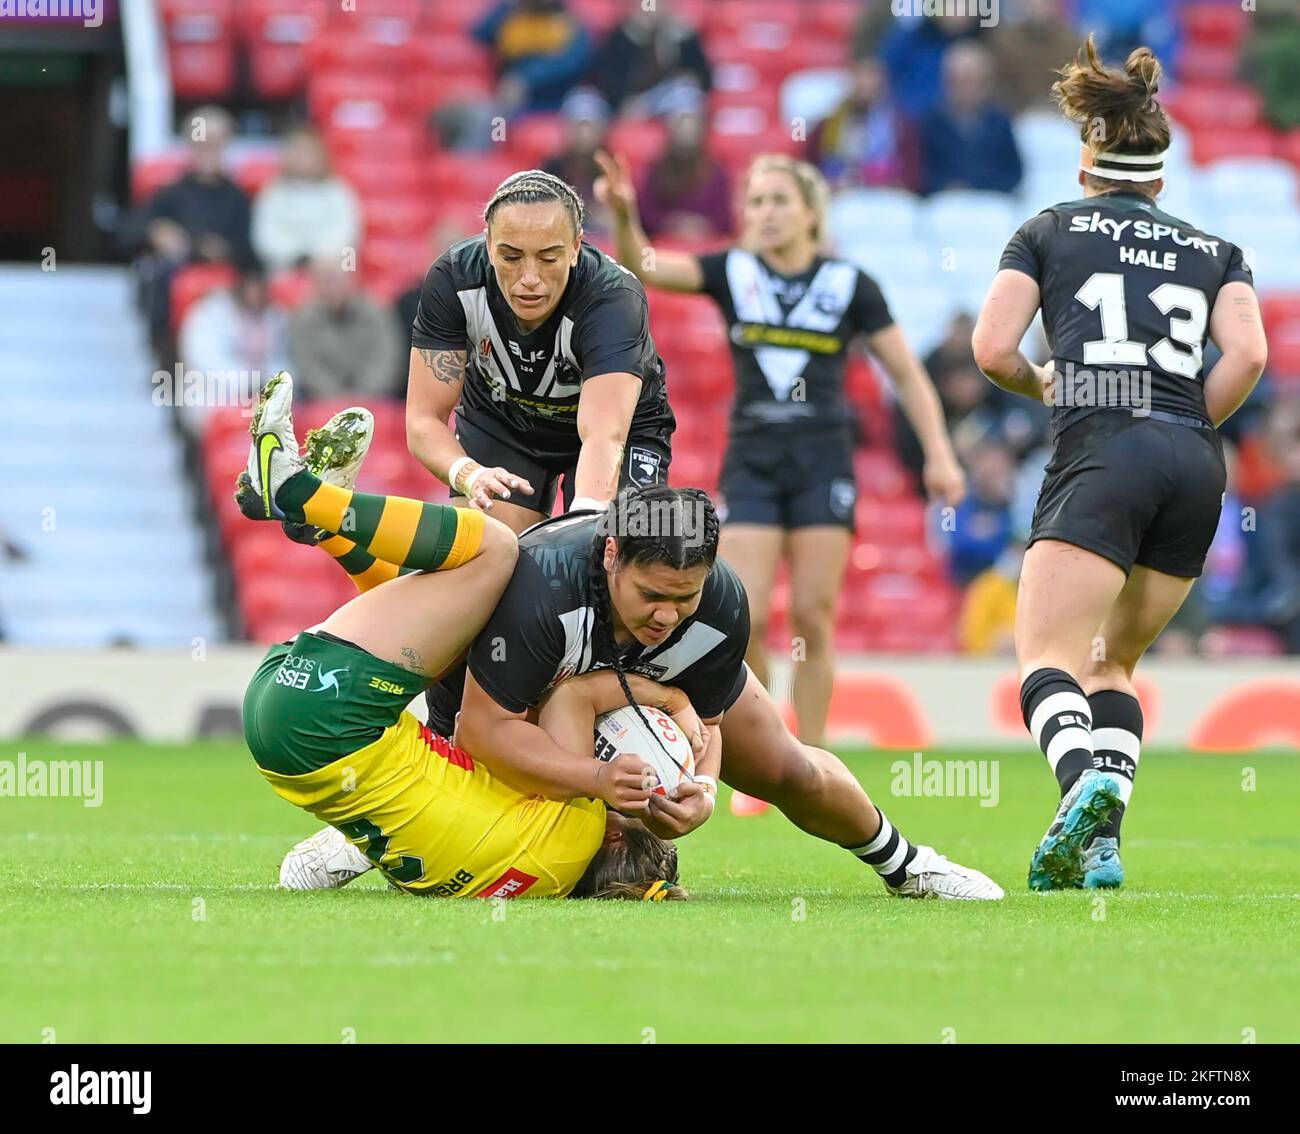 Manchester   ENGLAND - NOVEMBER 19 Match action . during  the Rugby league World Cup Womens Final  between Australia and New Zealand  at the Old Trafford   on November 19 - 2022 in Manchester England. Stock Photo